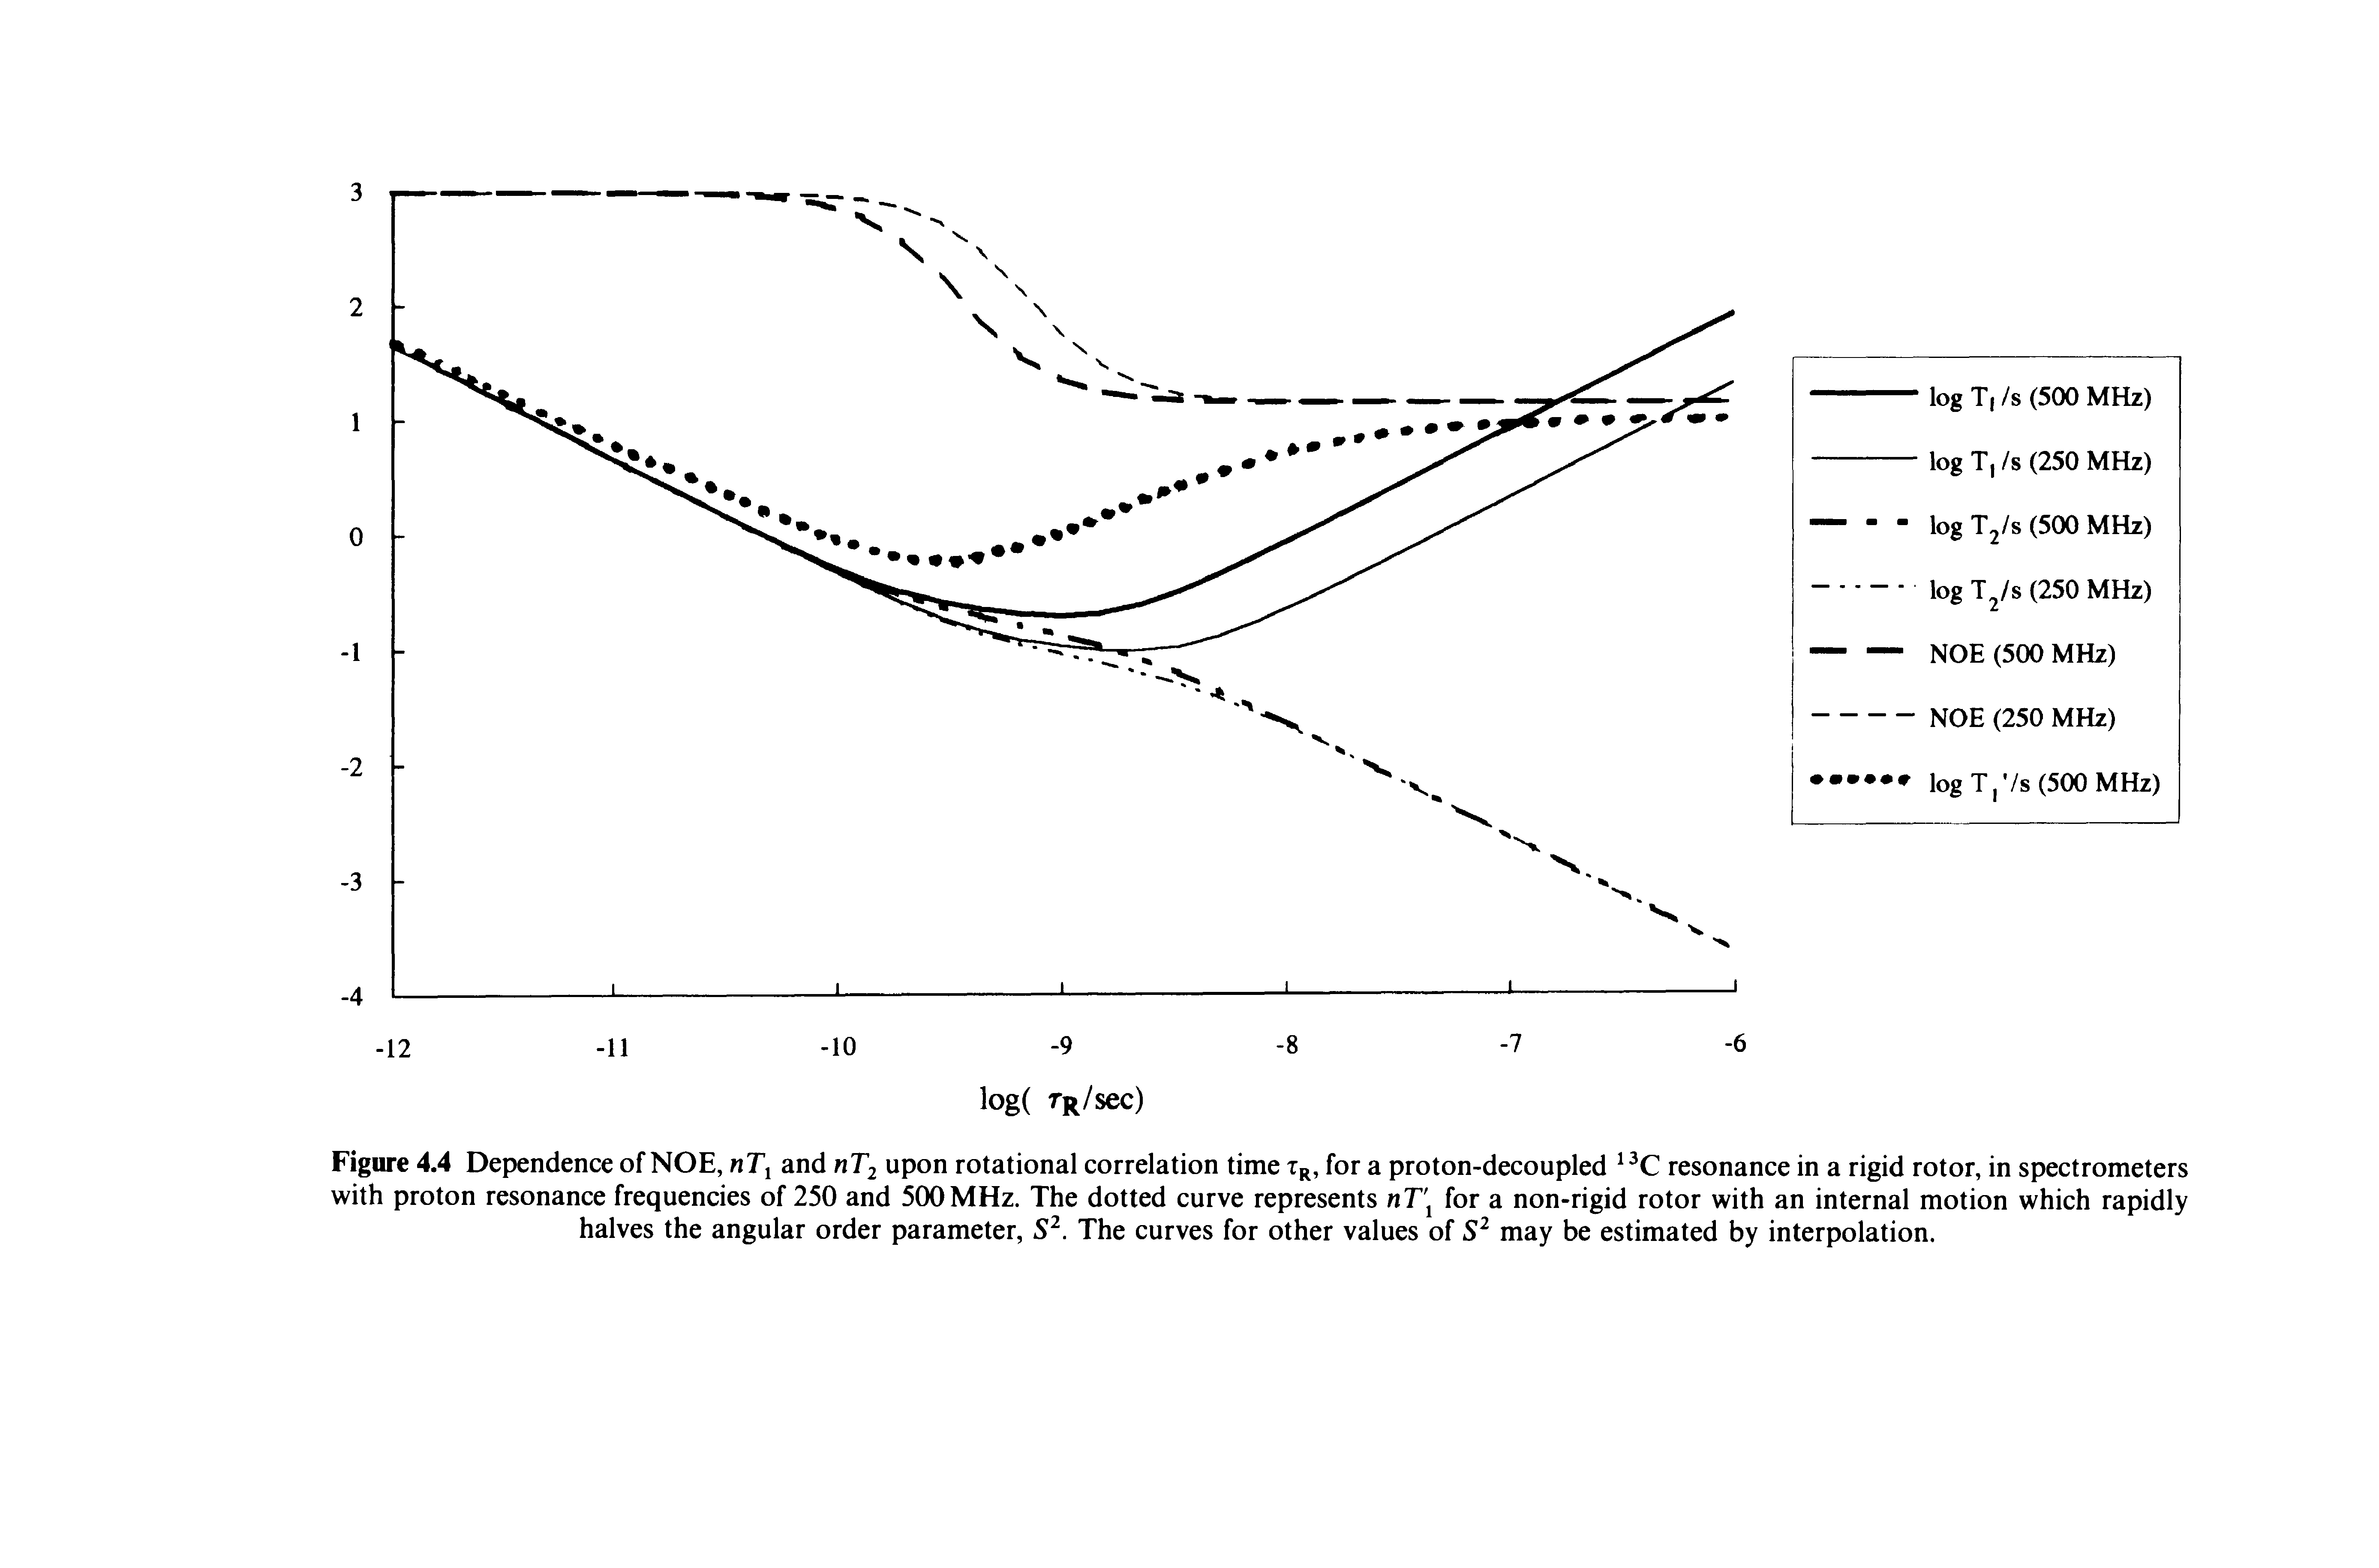 Figure 4.4 Dependence of NOE, nTi and nT2 upon rotational correlation time Tr, for a proton-decoupled resonance in a rigid rotor, in spectrometers with proton resonance frequencies of 250 and 500MHz. The dotted curve represents nT for a non-rigid rotor with an internal motion which rapidly halves the angular order parameter, S. The curves for other values of may be estimated by interpolation.